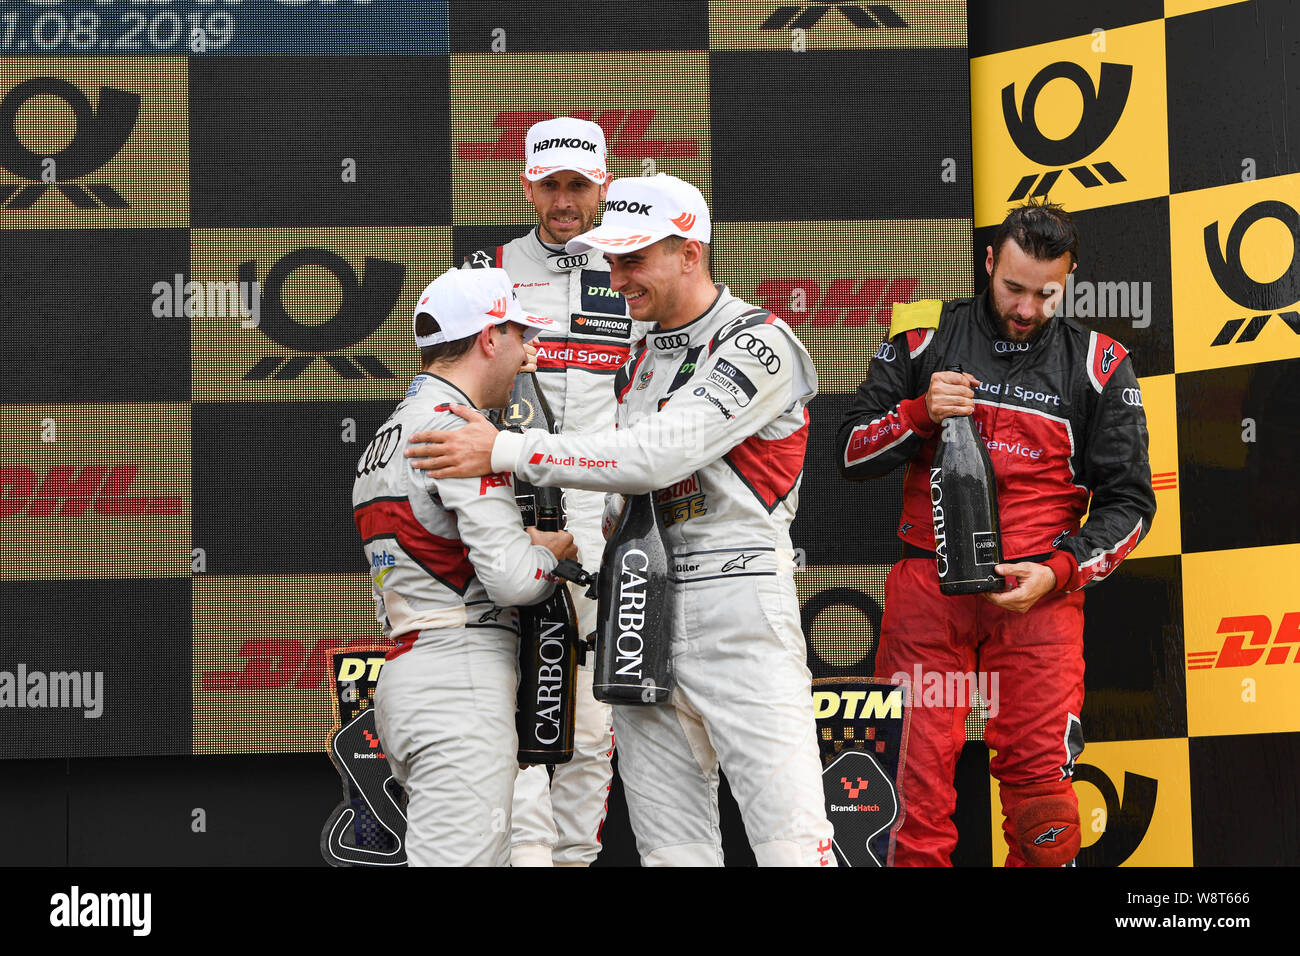 Kent, UK. 11th August 2019. René Rast (Audi Sport Team Rosberg) (centre), Nico Müller (Audi Sport Team Abt Sportsline) (left) and Robin Frijns (Audi Sport Team Abt Sportsline)  (right) congratulate each other at the winner’s presentation during DTM Race 2 of the DTM (German Touring Cars) and W Series at Brands Hatch GP Circuit on Sunday, August 11, 2019 in KENT, ENGLAND. Credit: Taka G Wu/Alamy Live News Credit: Taka Wu/Alamy Live News Stock Photo